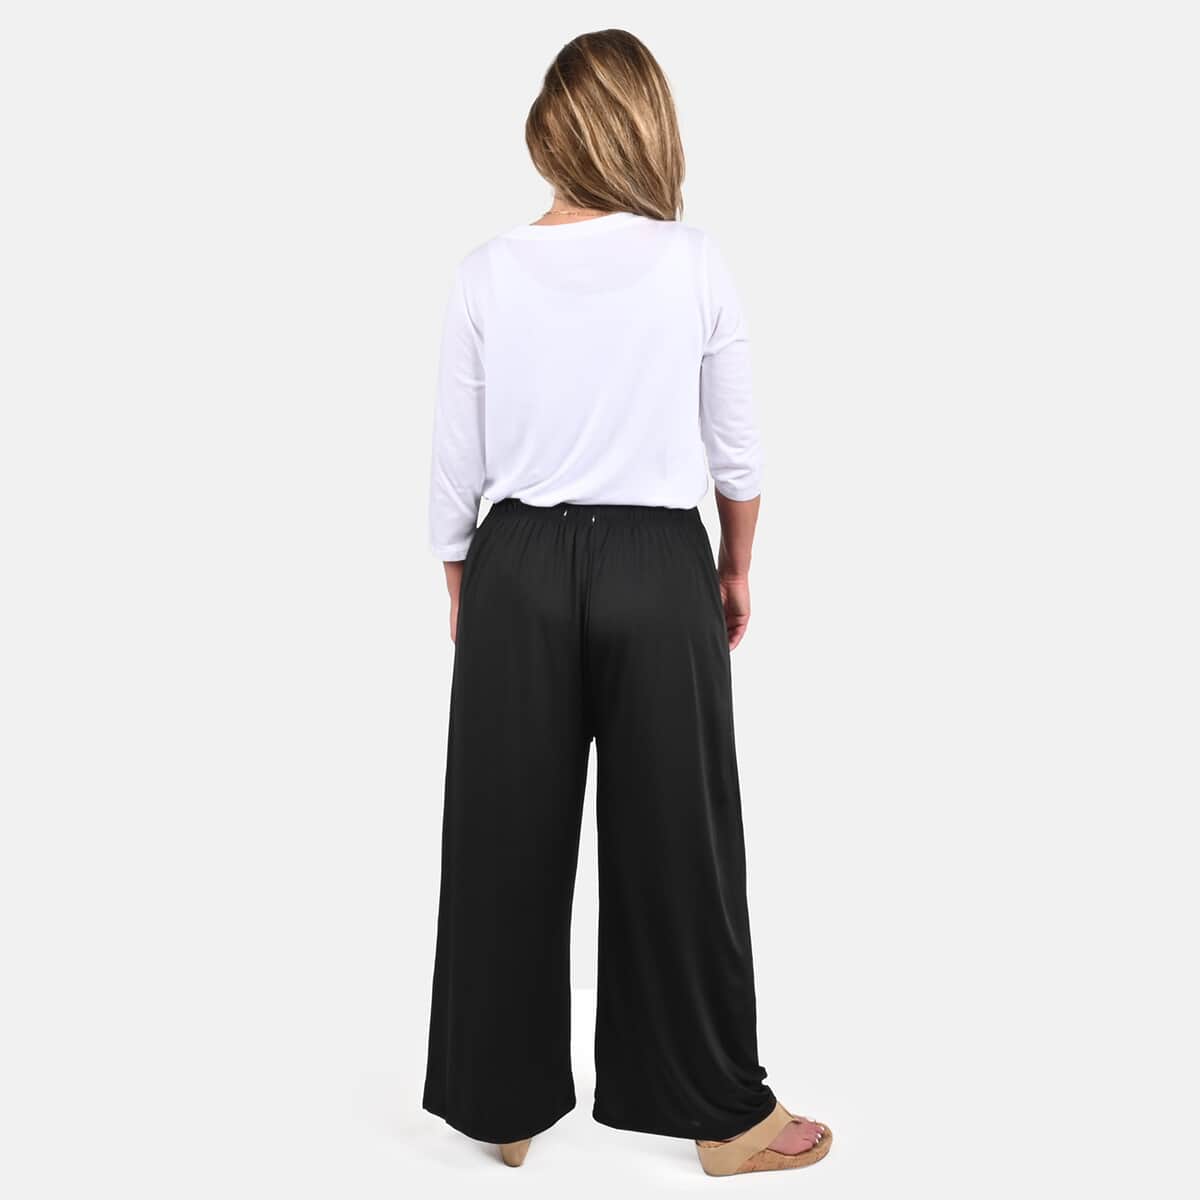 TAMSY Black Color Printed Trouser - One Size Fits Most image number 1